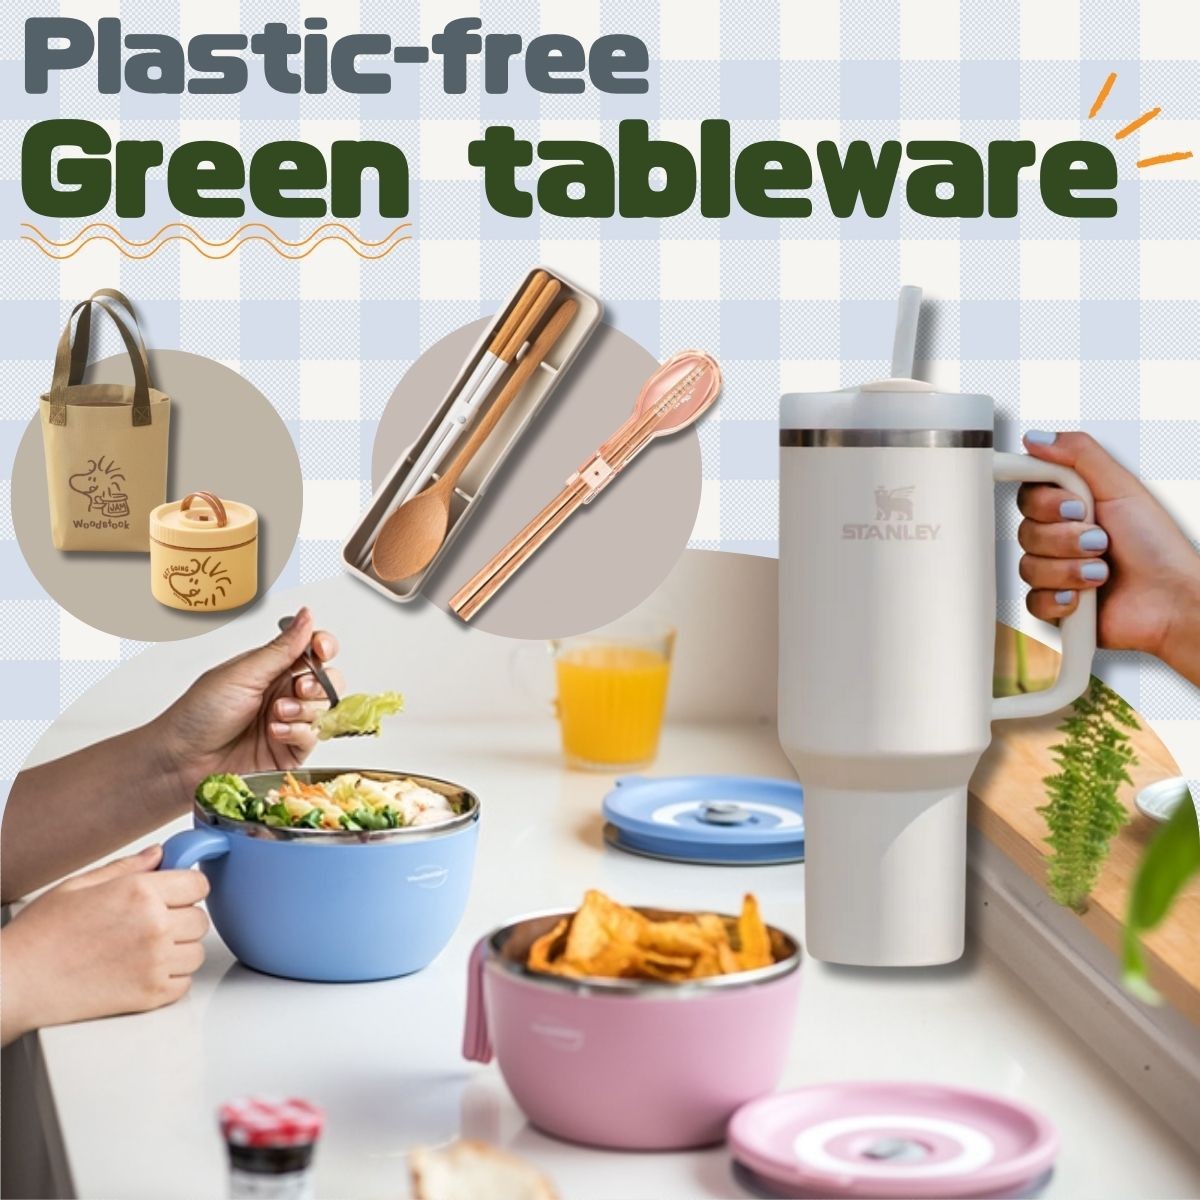 Environmentally friendly tableware recommendations